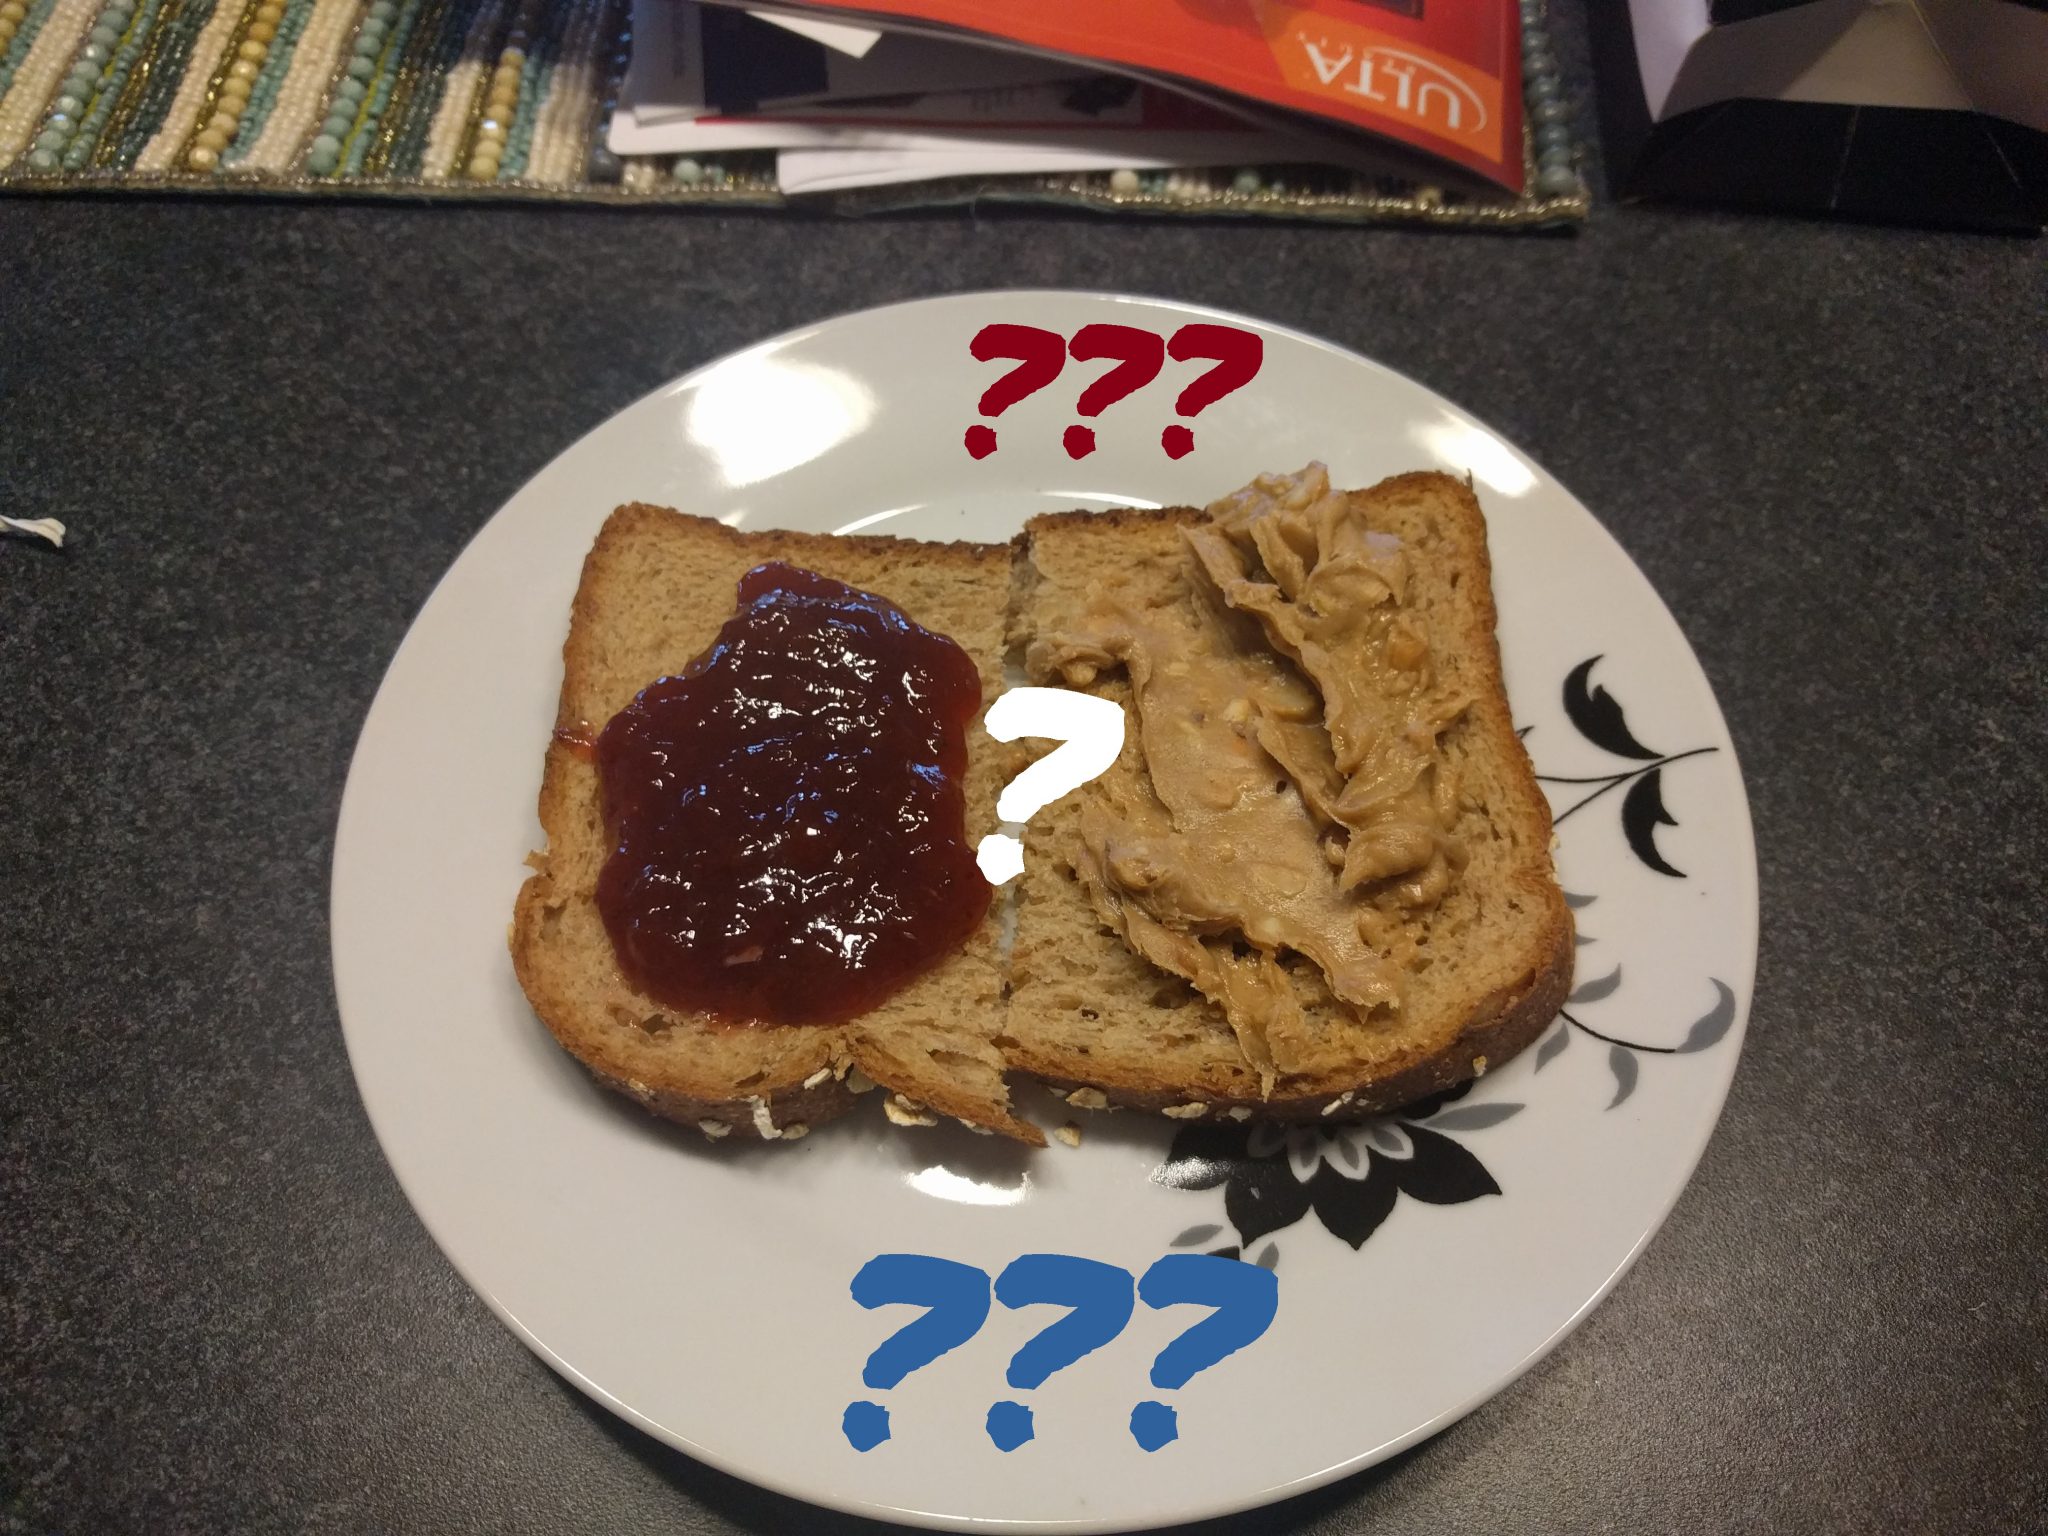 Peanut Butter and Jelly Surprise